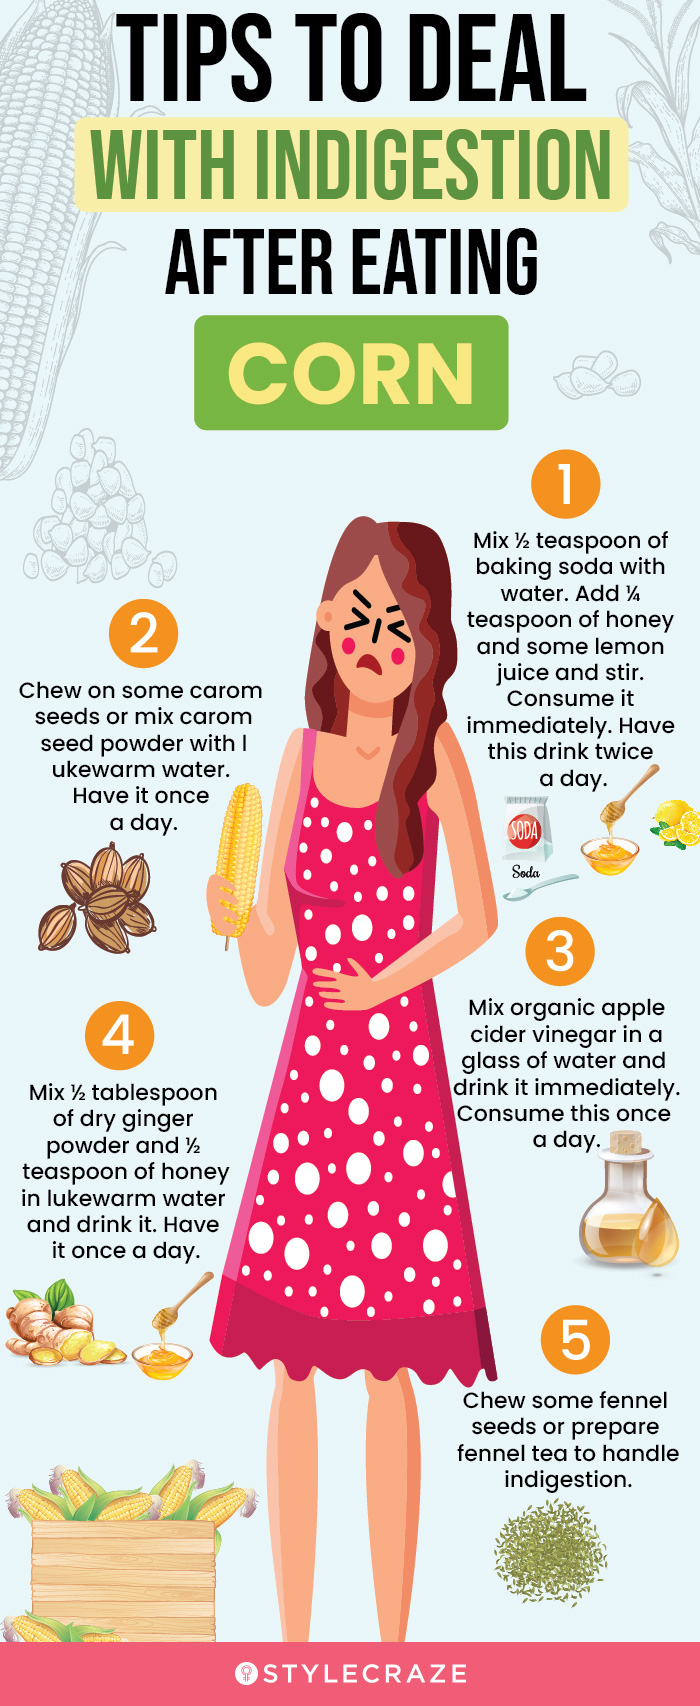 tips to deal with indigestion after eating corn (infographic)